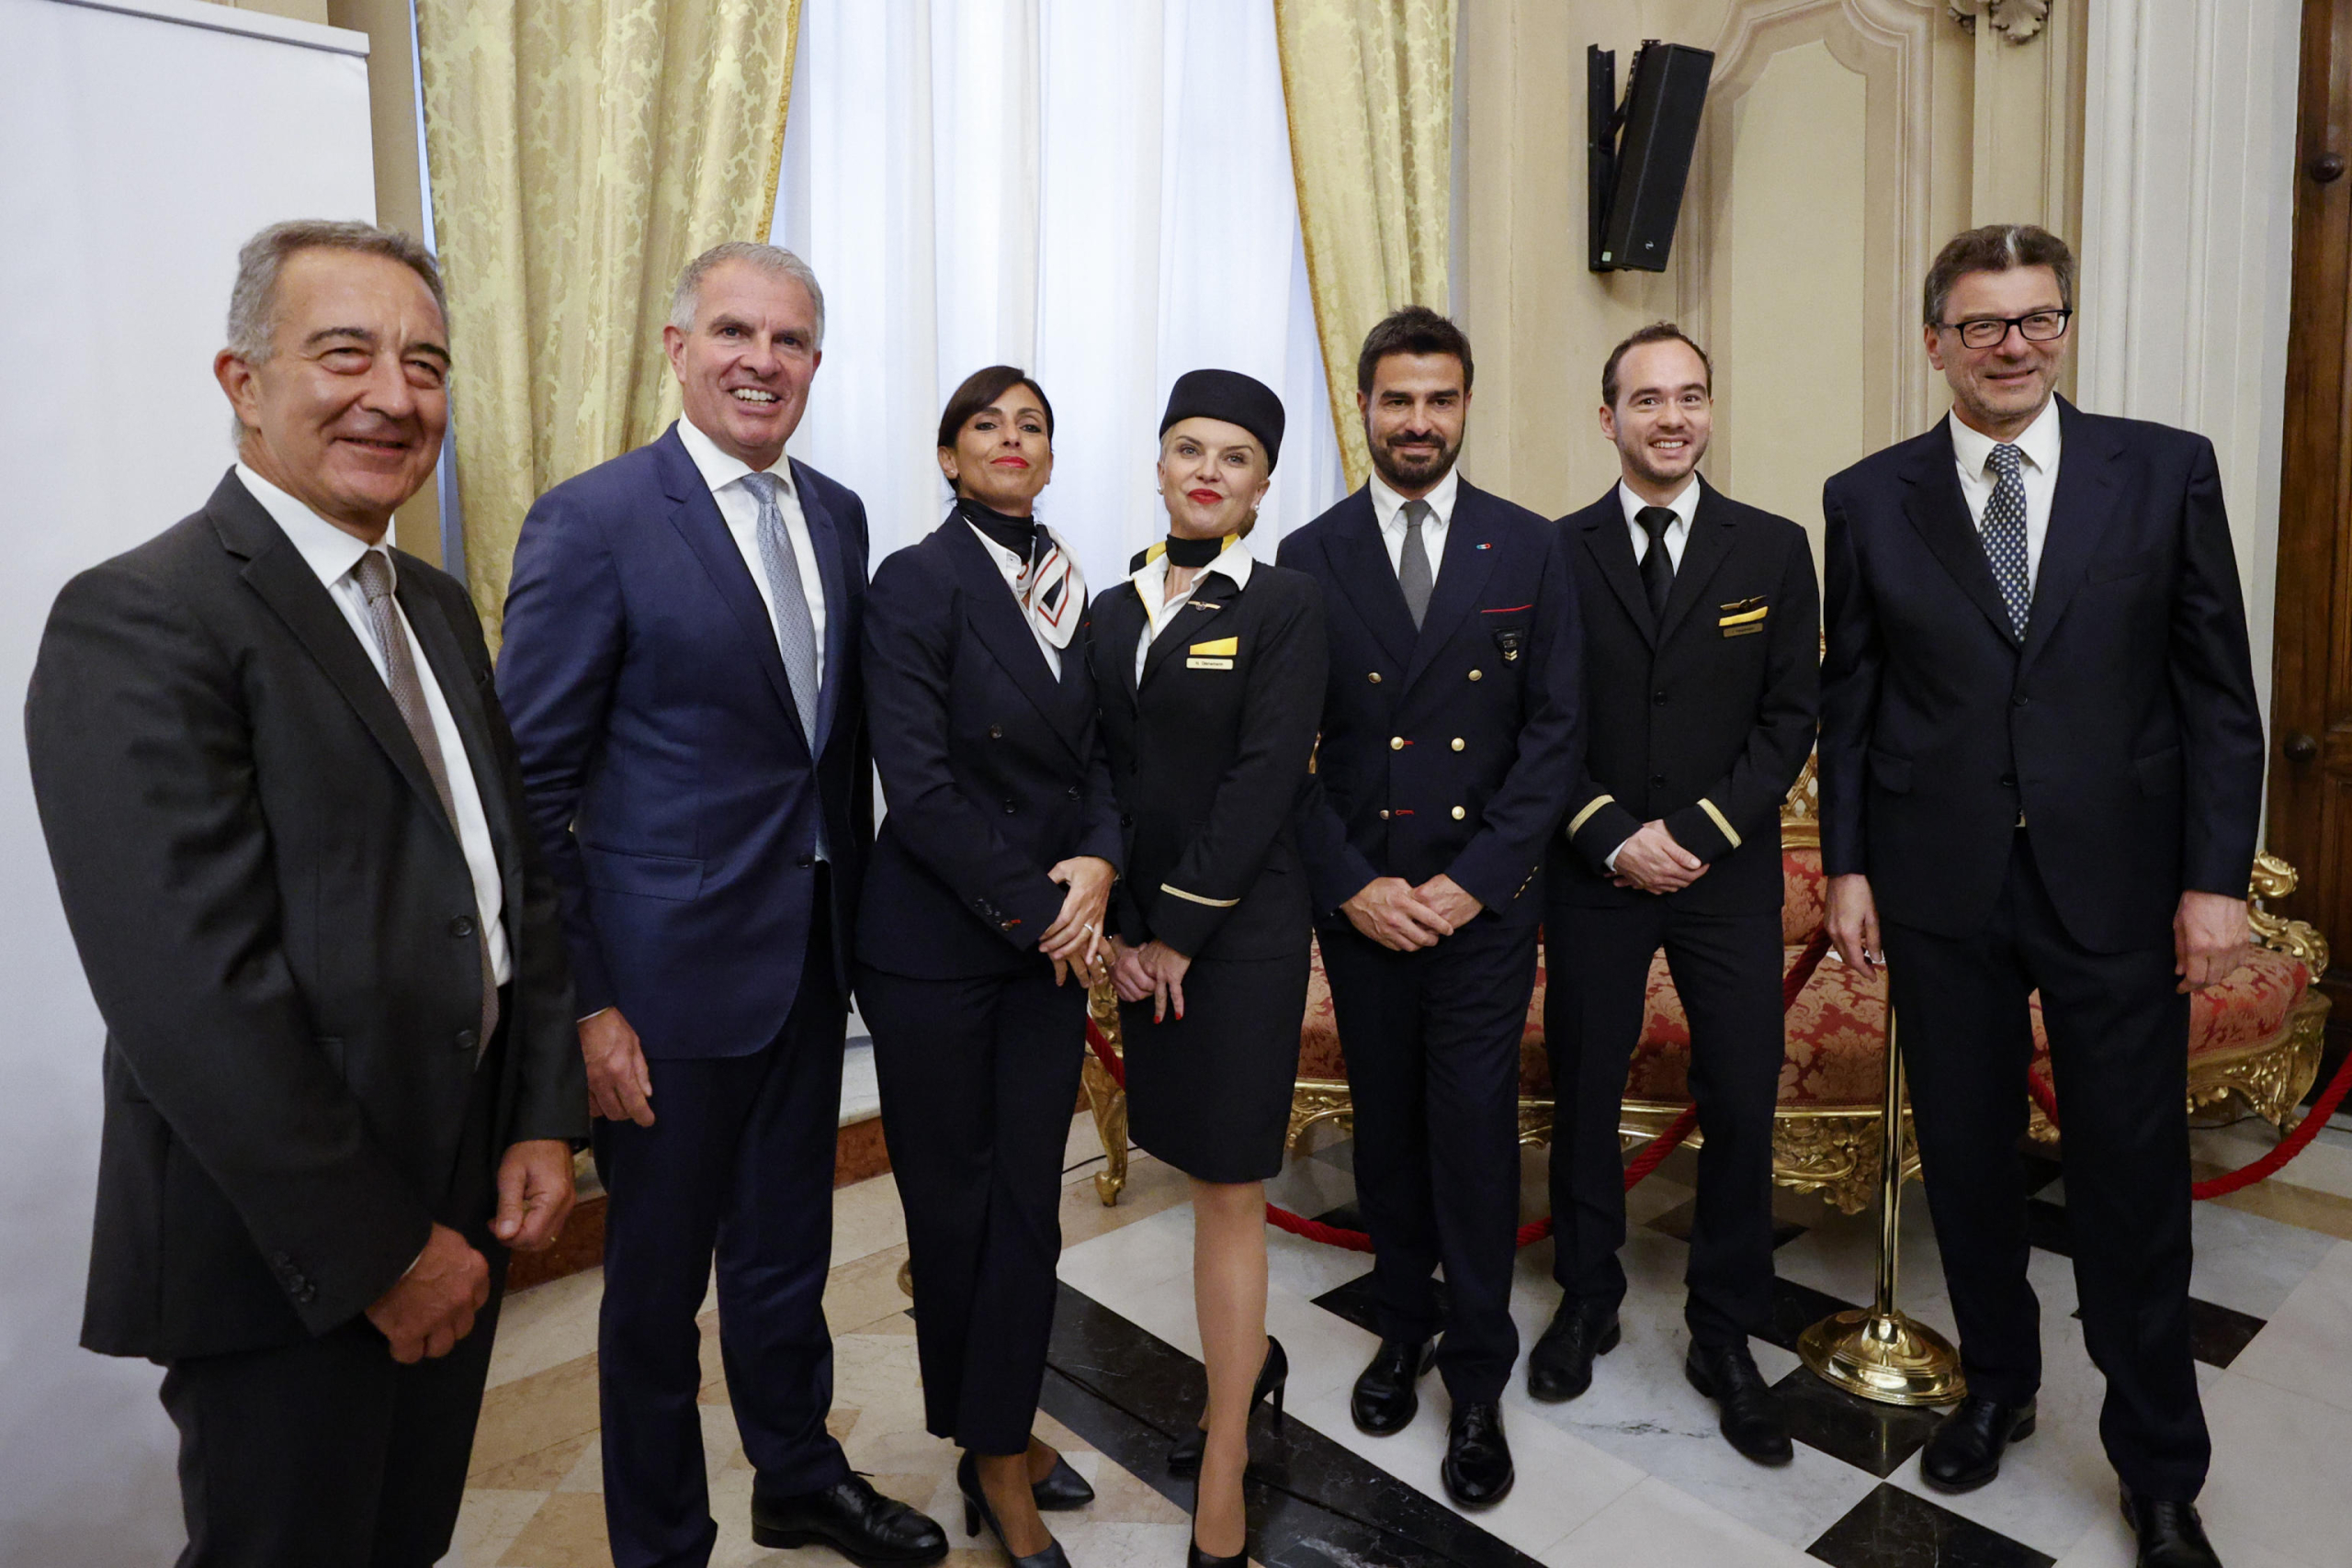 (L-R)President of Ita Airways Antonino
Turicchi, Lufthansa CEO Carsten Spohr and Italian Economy Minister Giancarlo Giorgetti poses with members of crew during a press conference presenting the agreement between Ita Airways and Lufthansa, Rome 3 July 2024. ANSA/FABIO FRUSTACI